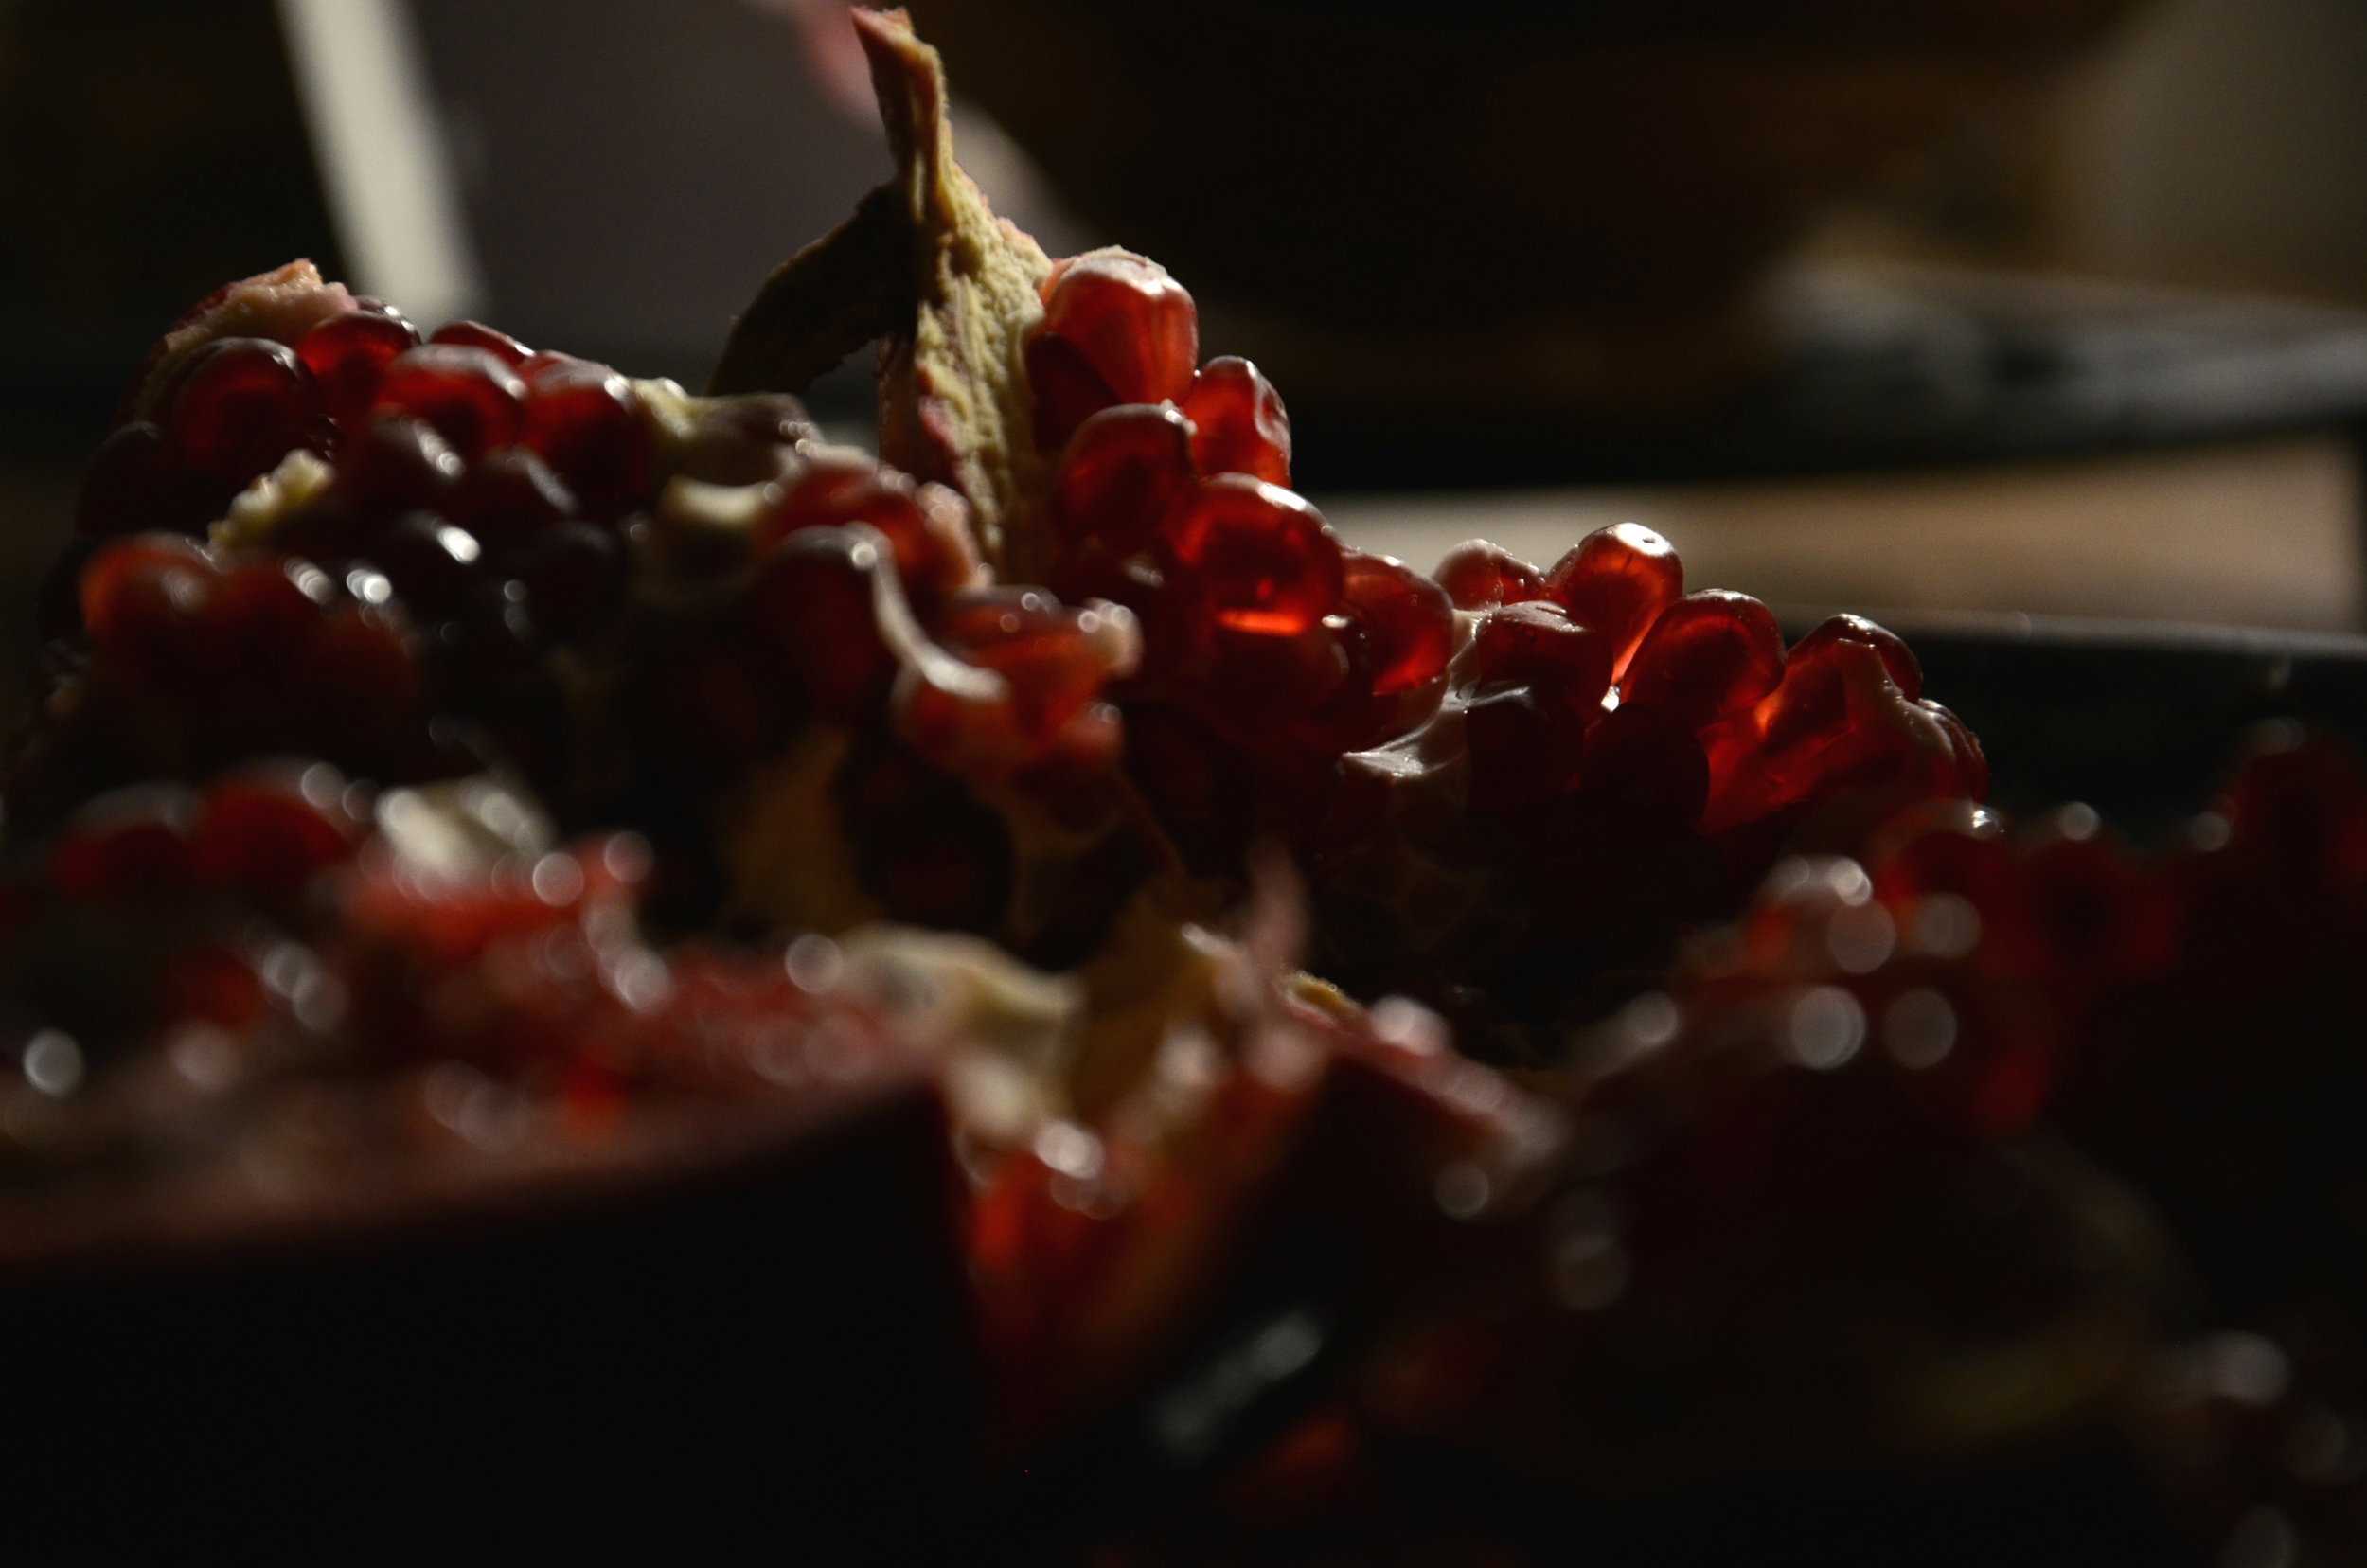 Pomegranate Seeds in Light